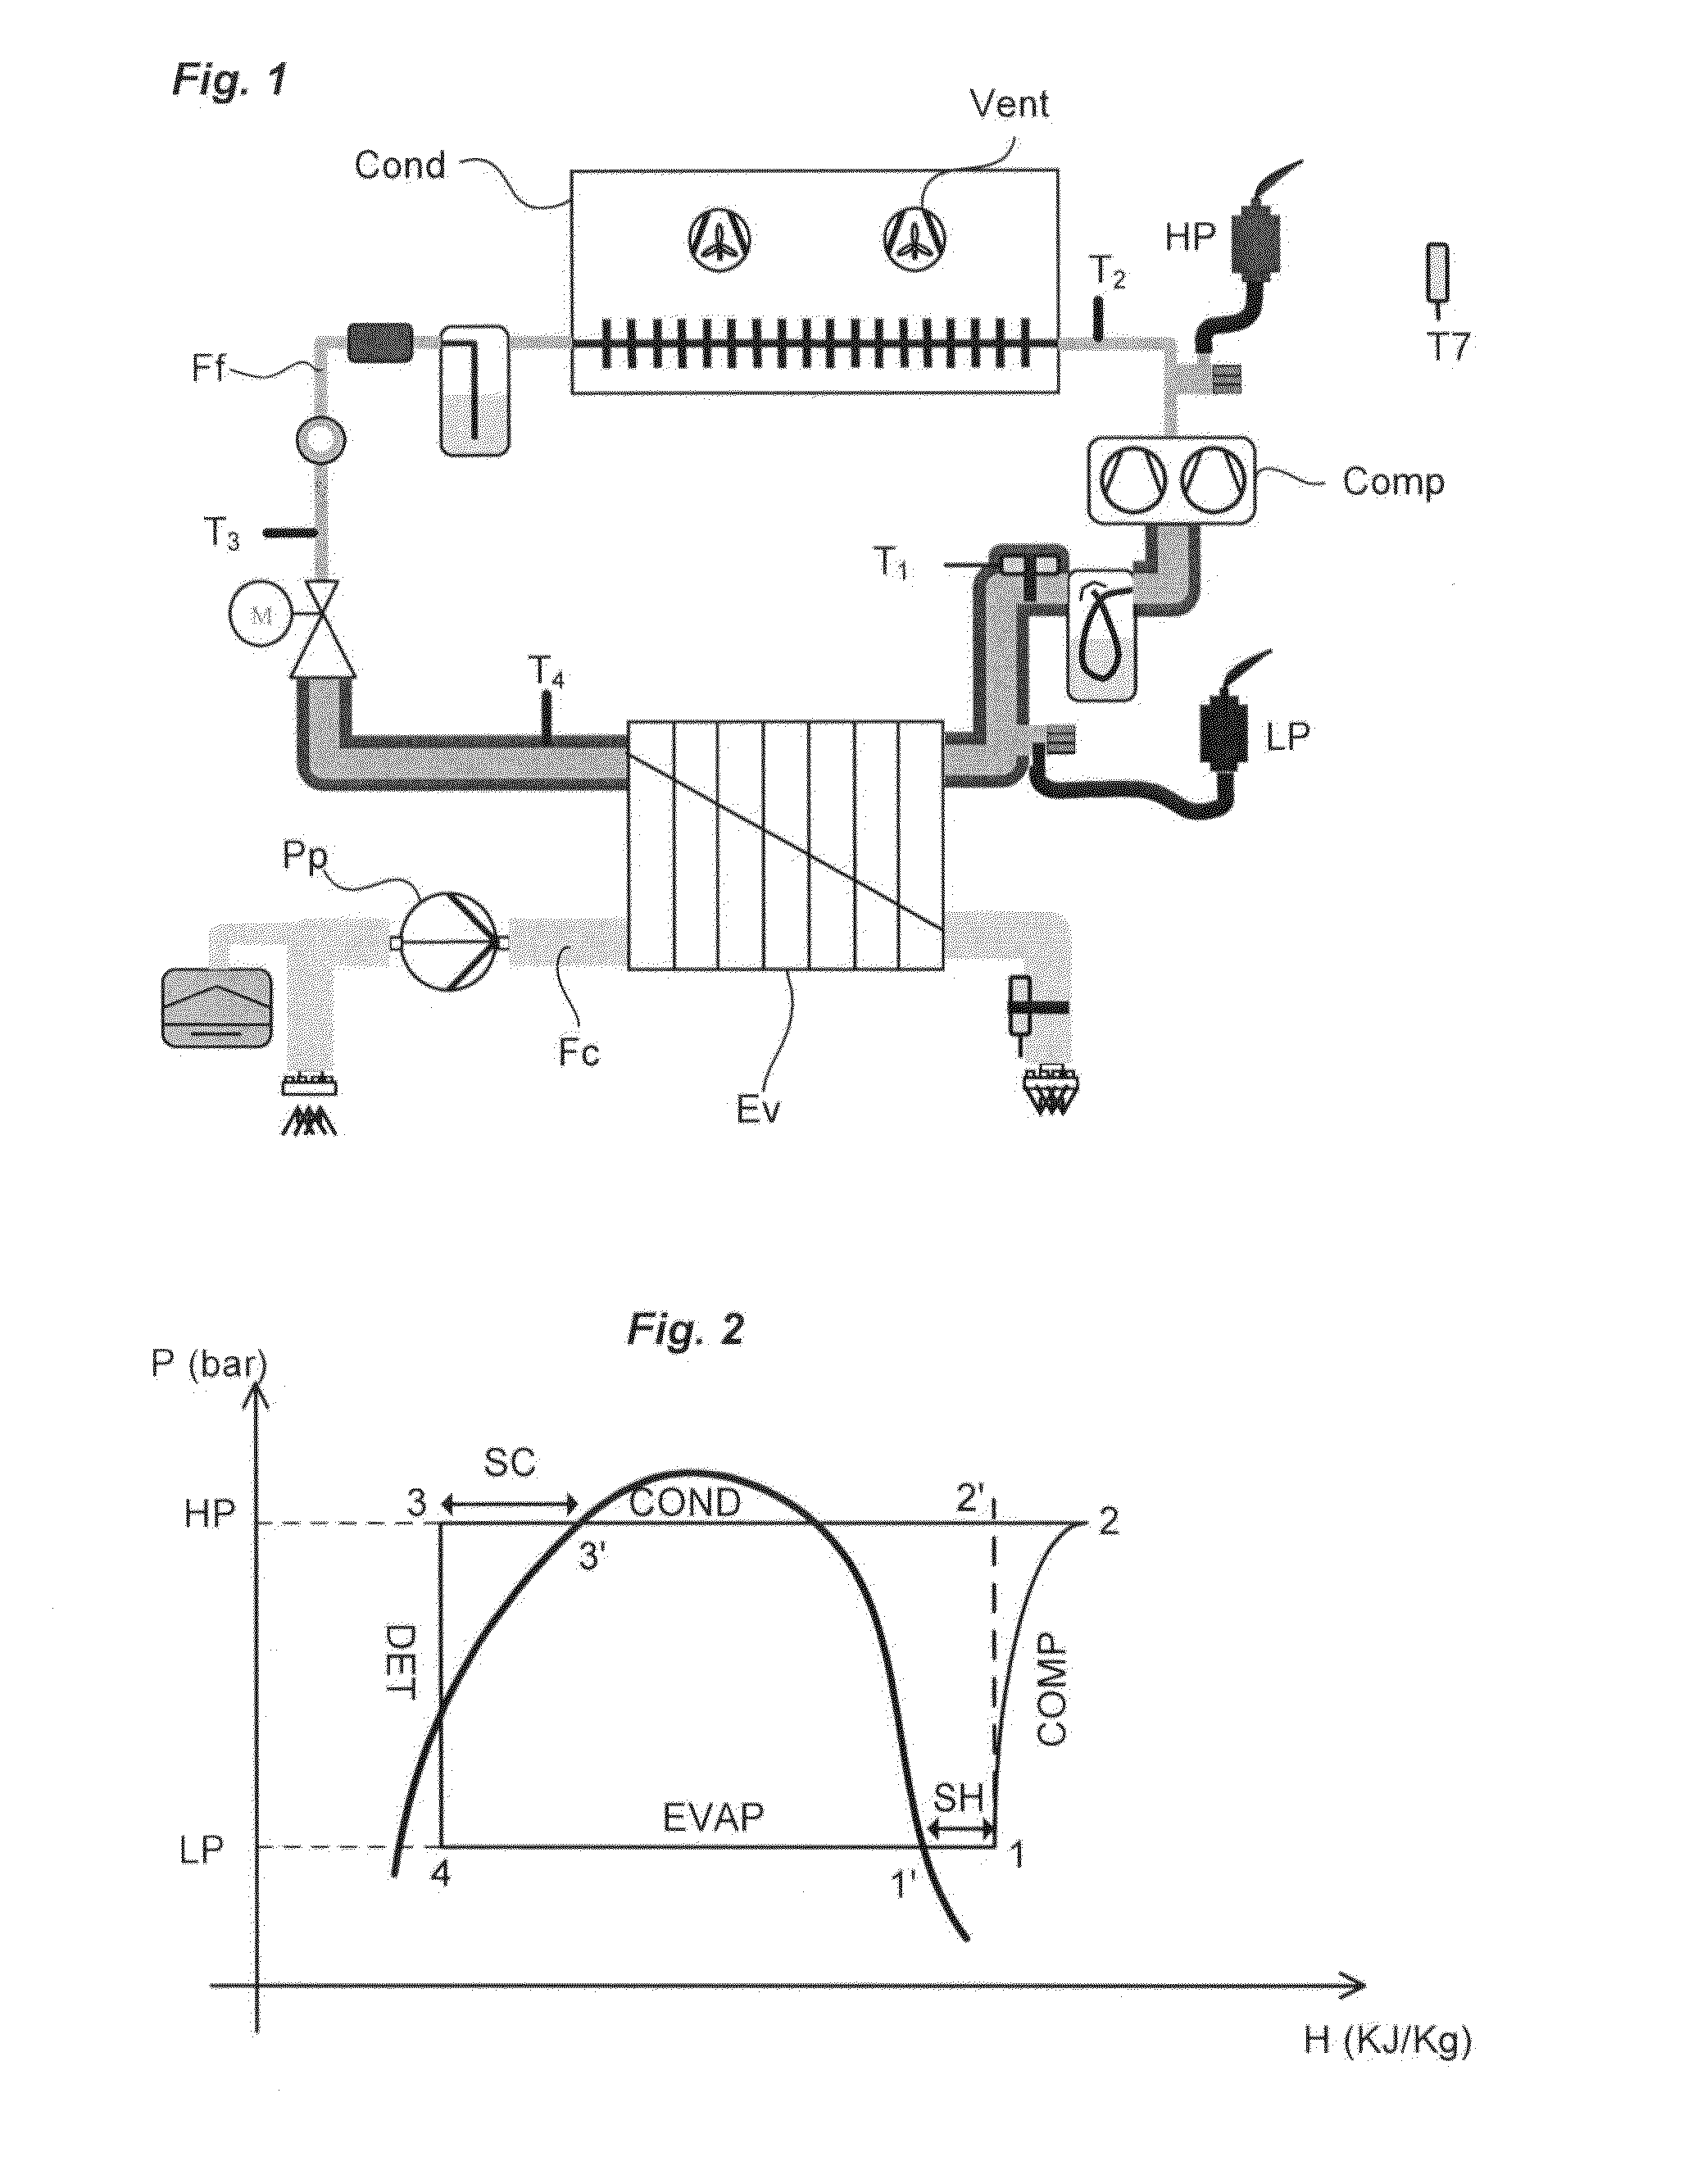 Method for the diagnostic analysis of a heating, ventilation and air-conditioning system (HVAC)